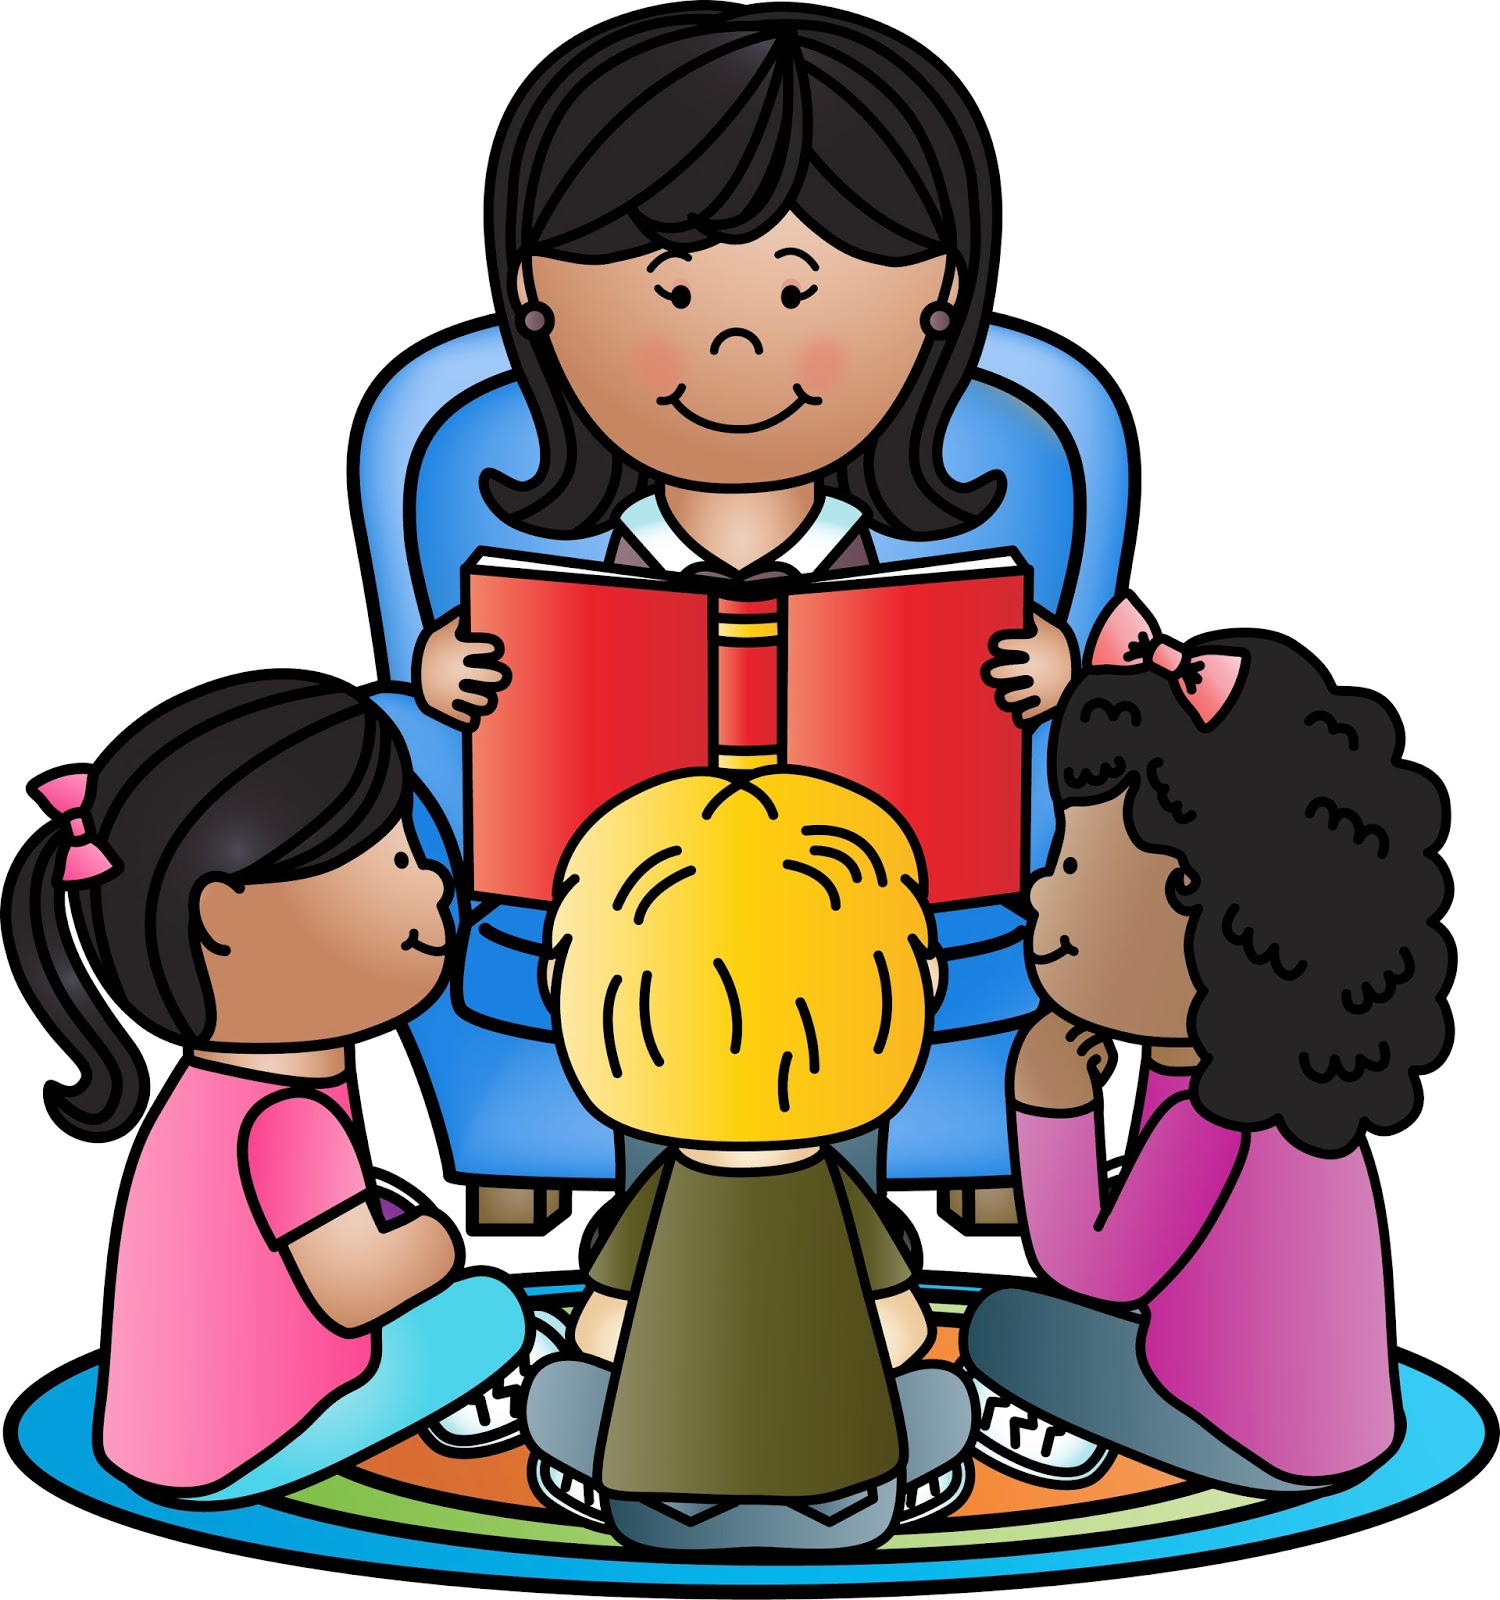 Students In Classroom Clipart